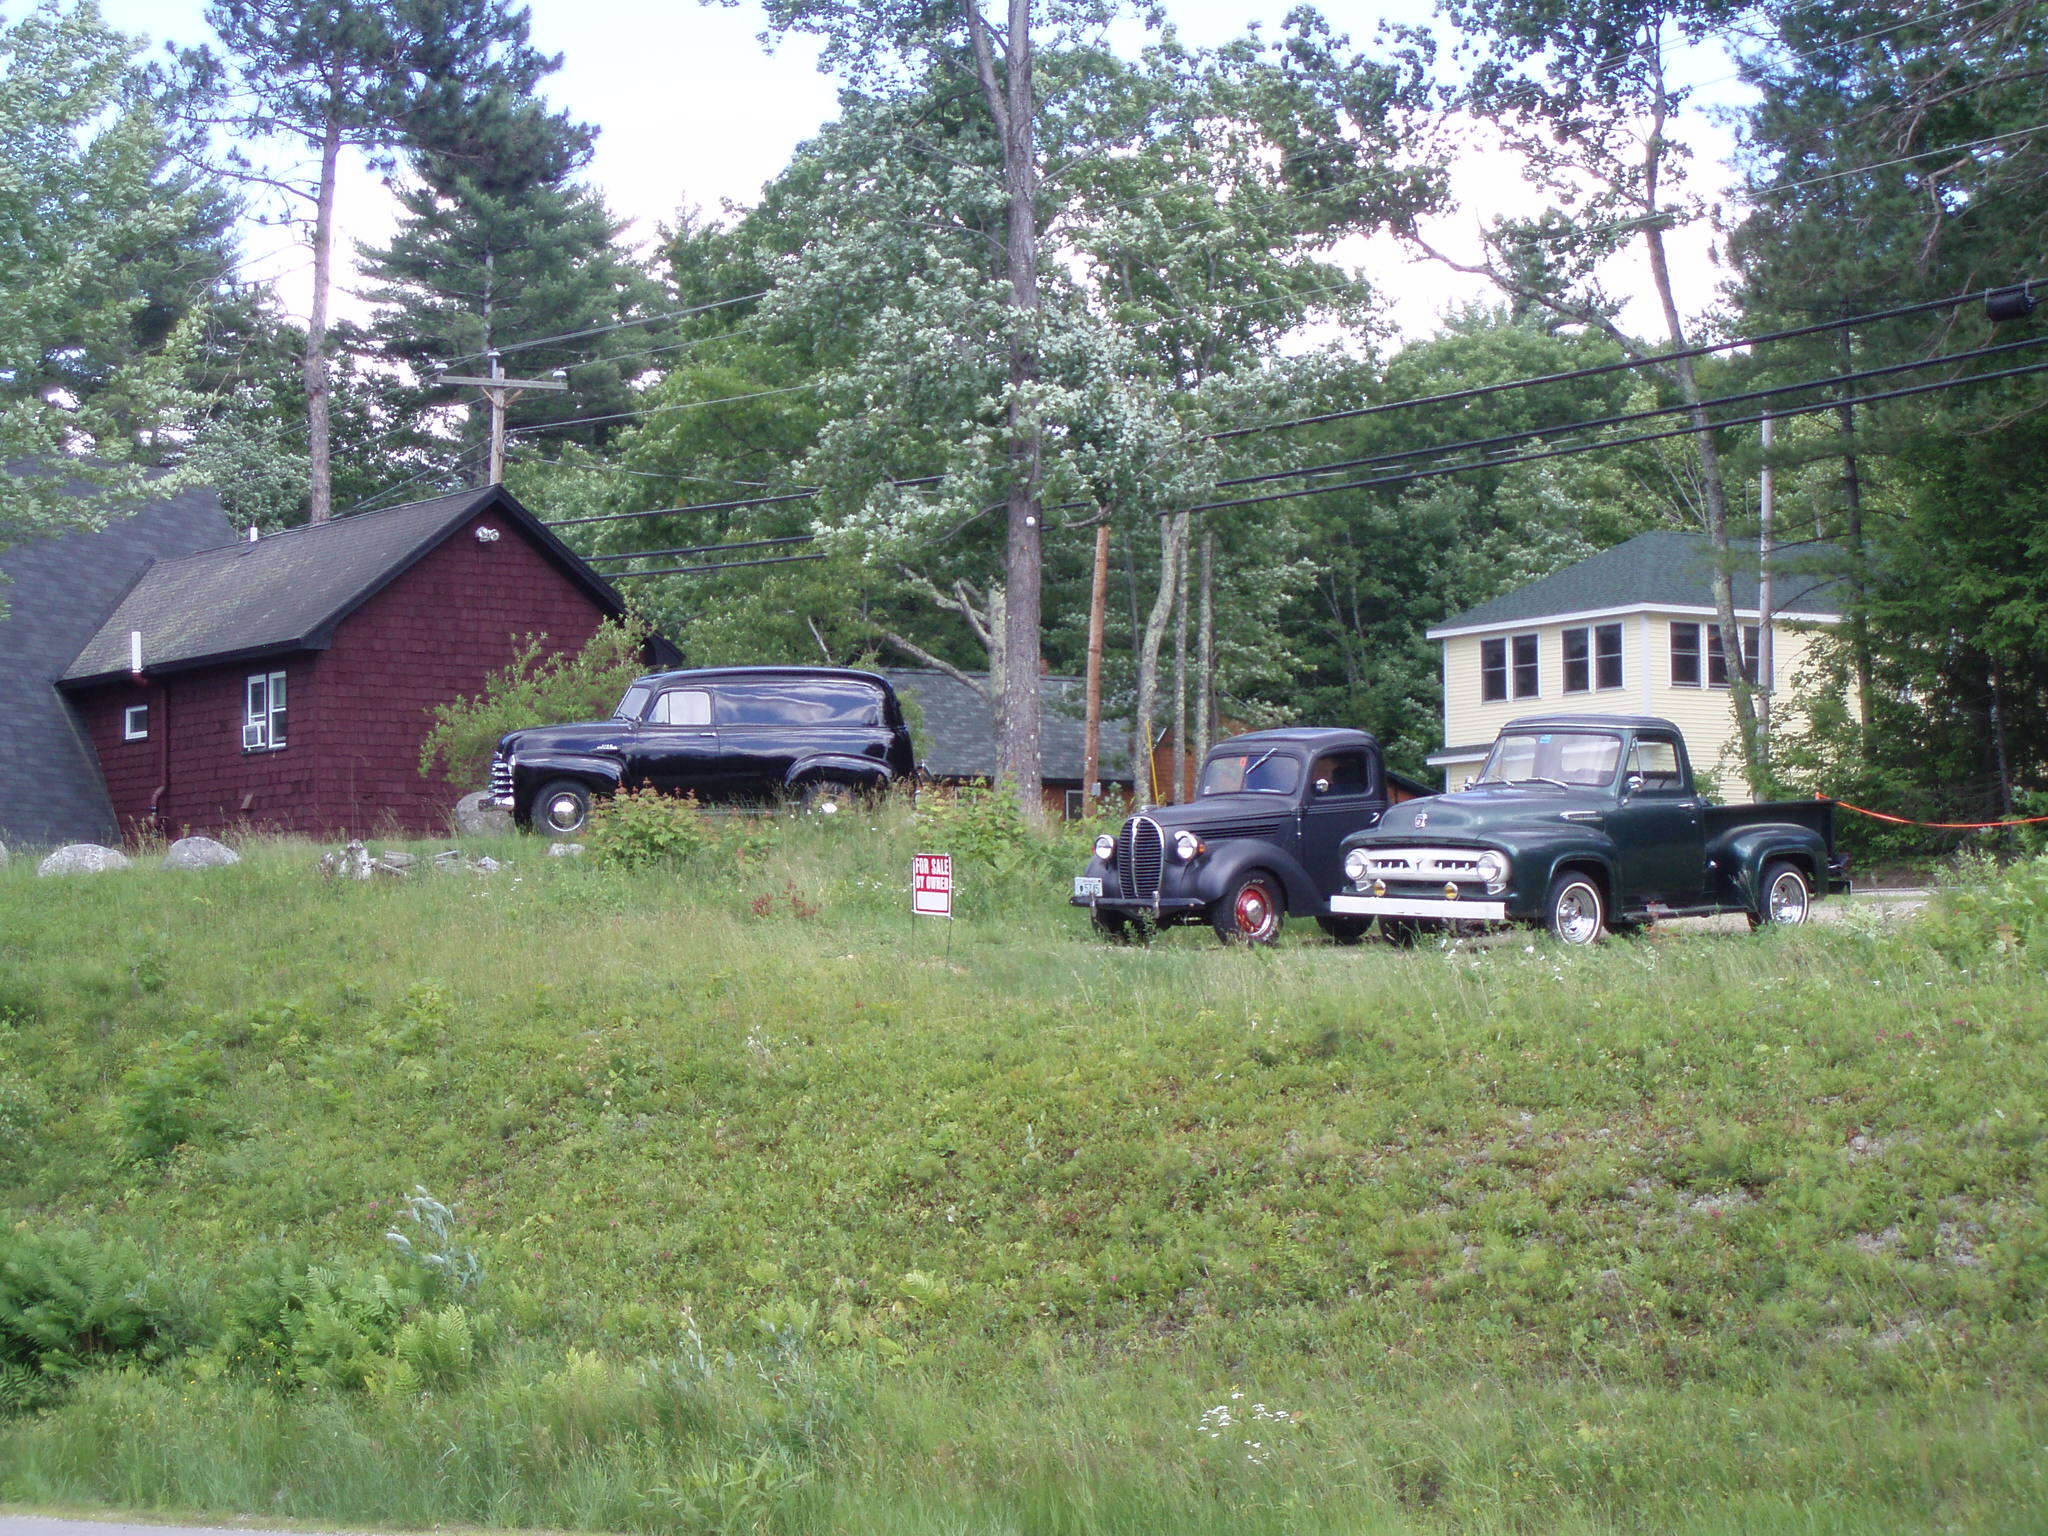 Brick houses and black trucks during our cross country bicycle tour